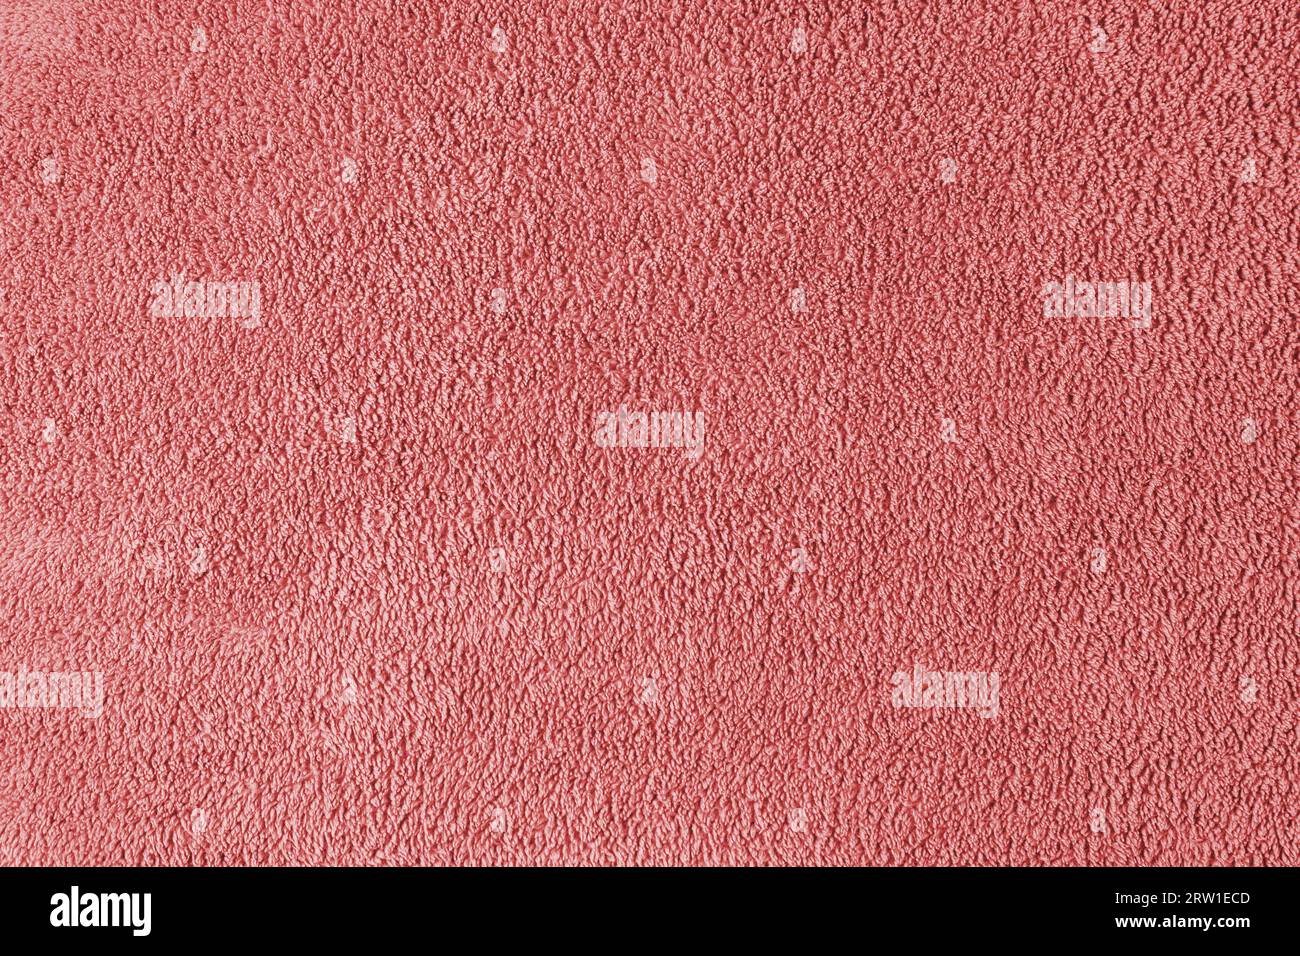 Terry cloth, red towel texture background. Soft fluffy textile bath or beach towel material. Top view, close up. Stock Photo